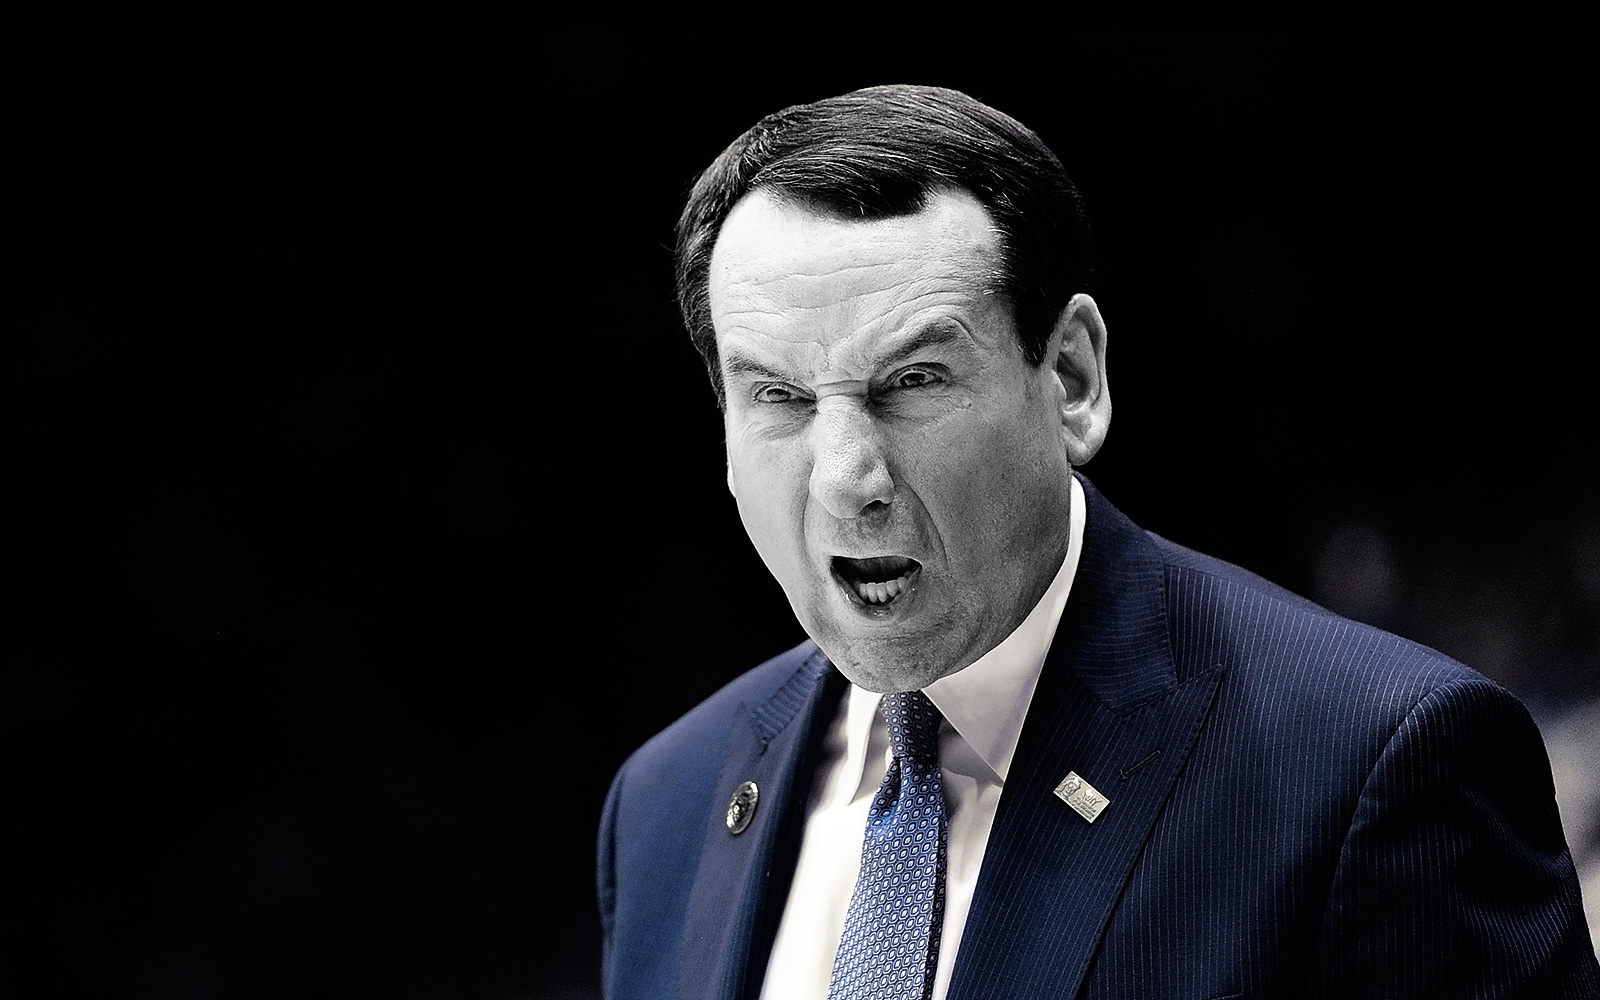 DURHAM, NC - FEBRUARY 15:  Head coach Mike Krzyzewski of the Duke Blue Devils reacts to a call during the game against the Maryland Terrapins at Cameron Indoor Stadium on February 15, 2014 in Durham, North Carolina. (Photo by G Fiume/Maryland Terrapins/Getty Images)  *** Local Caption *** Mike Krzyzewski